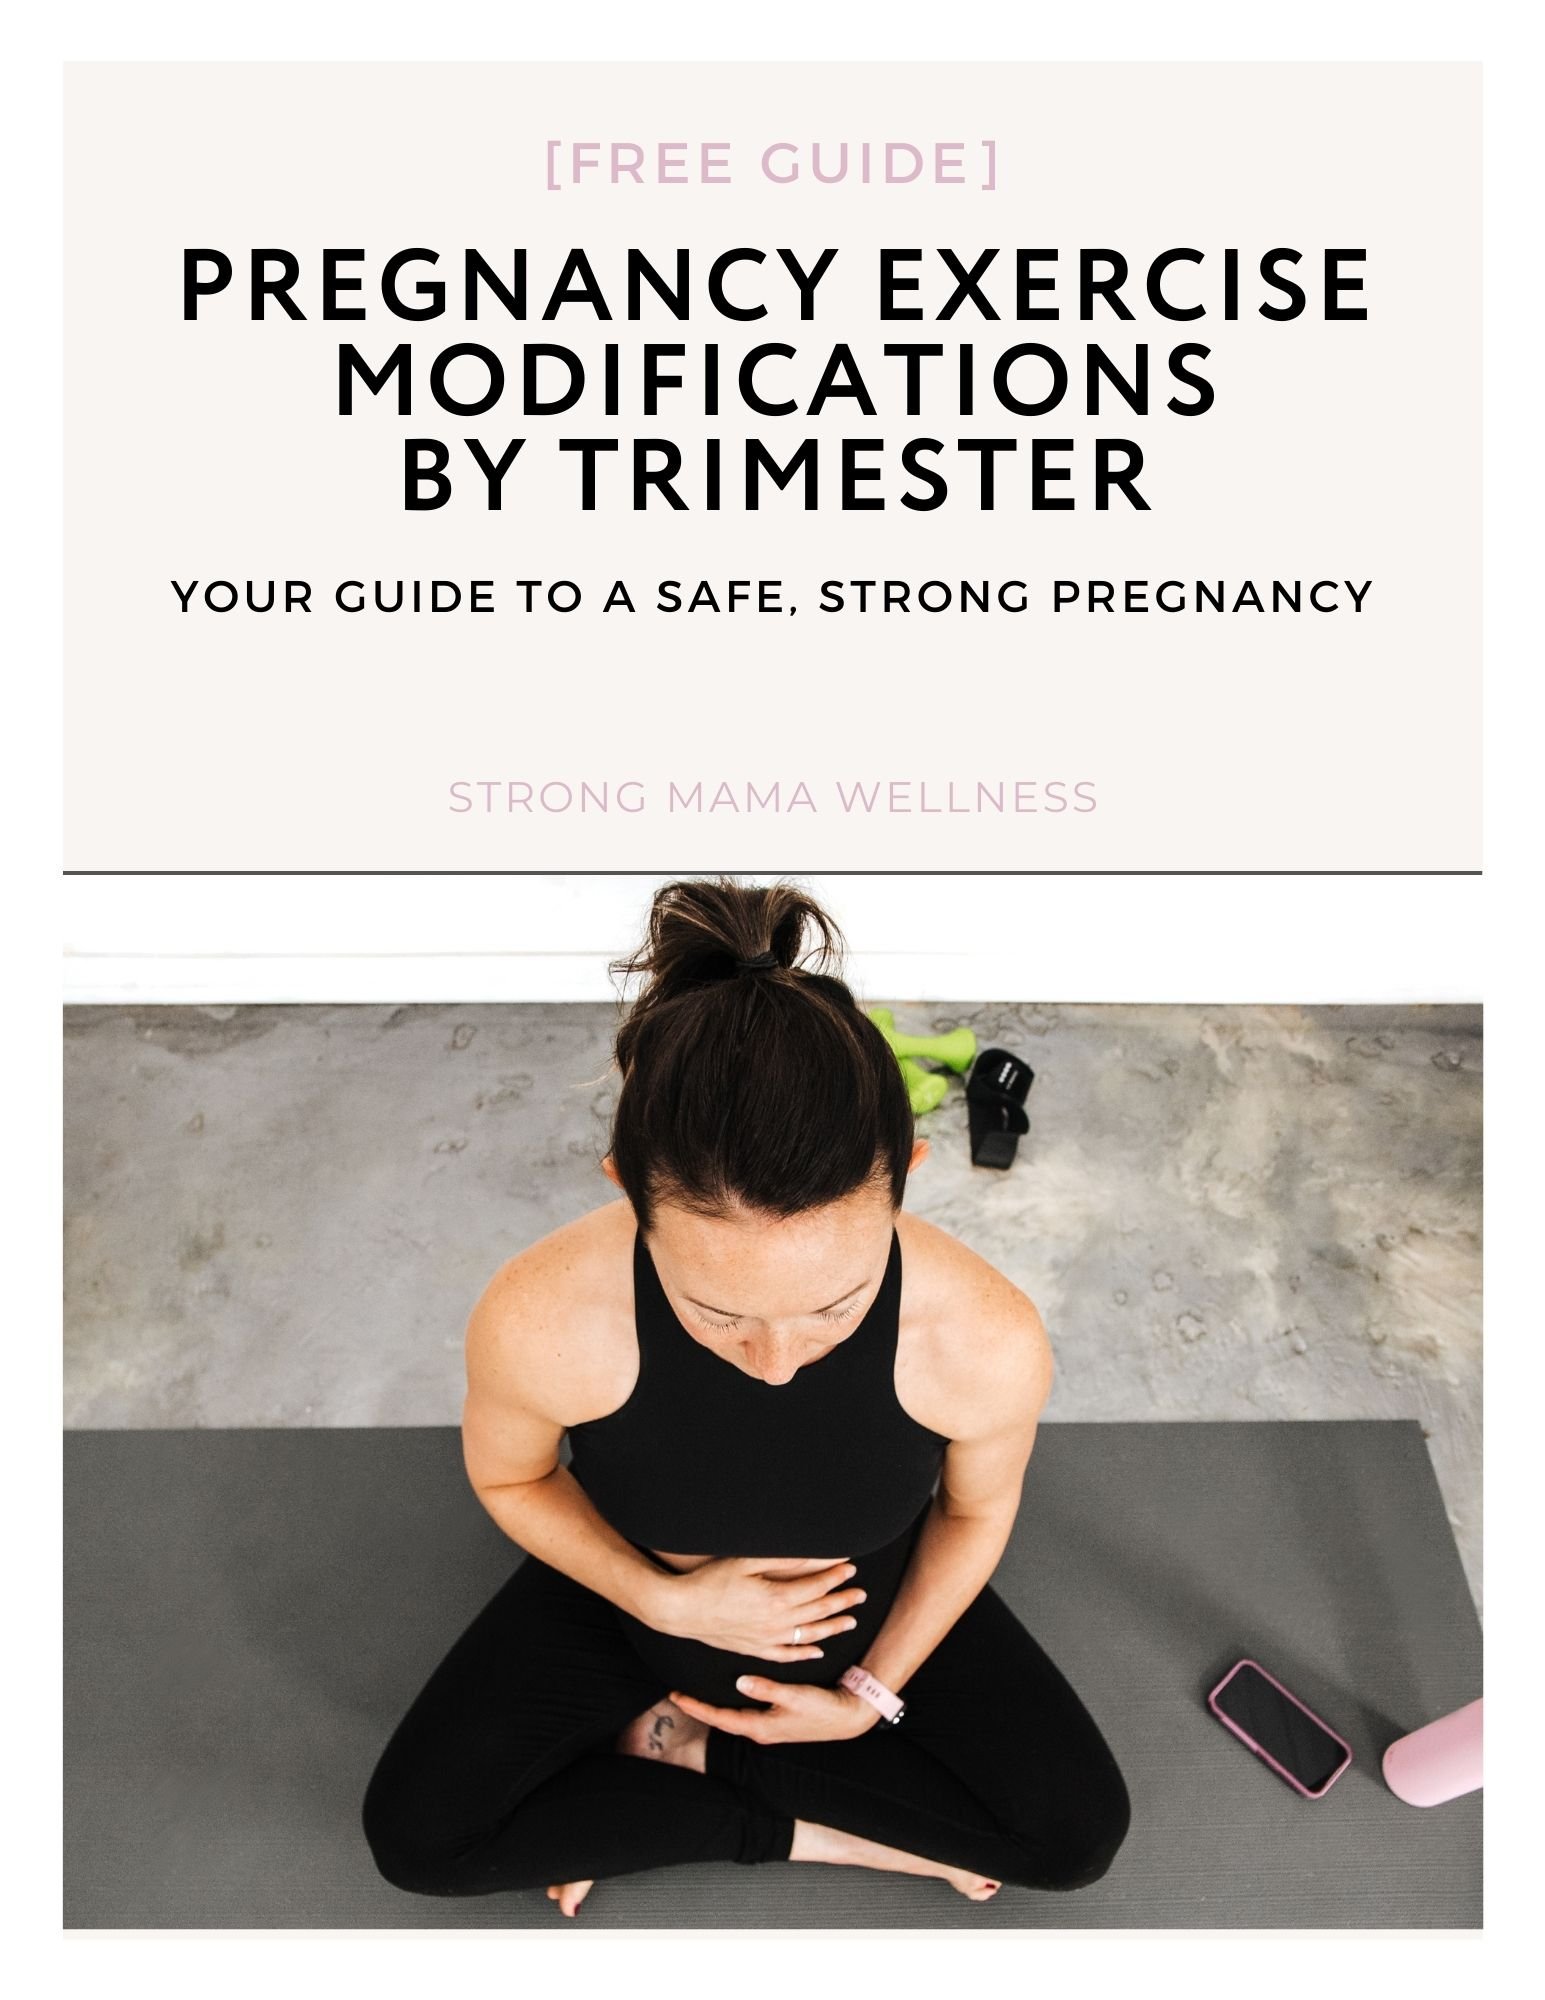 A trimester-by-trimester guide to safe exercise during pregnancy